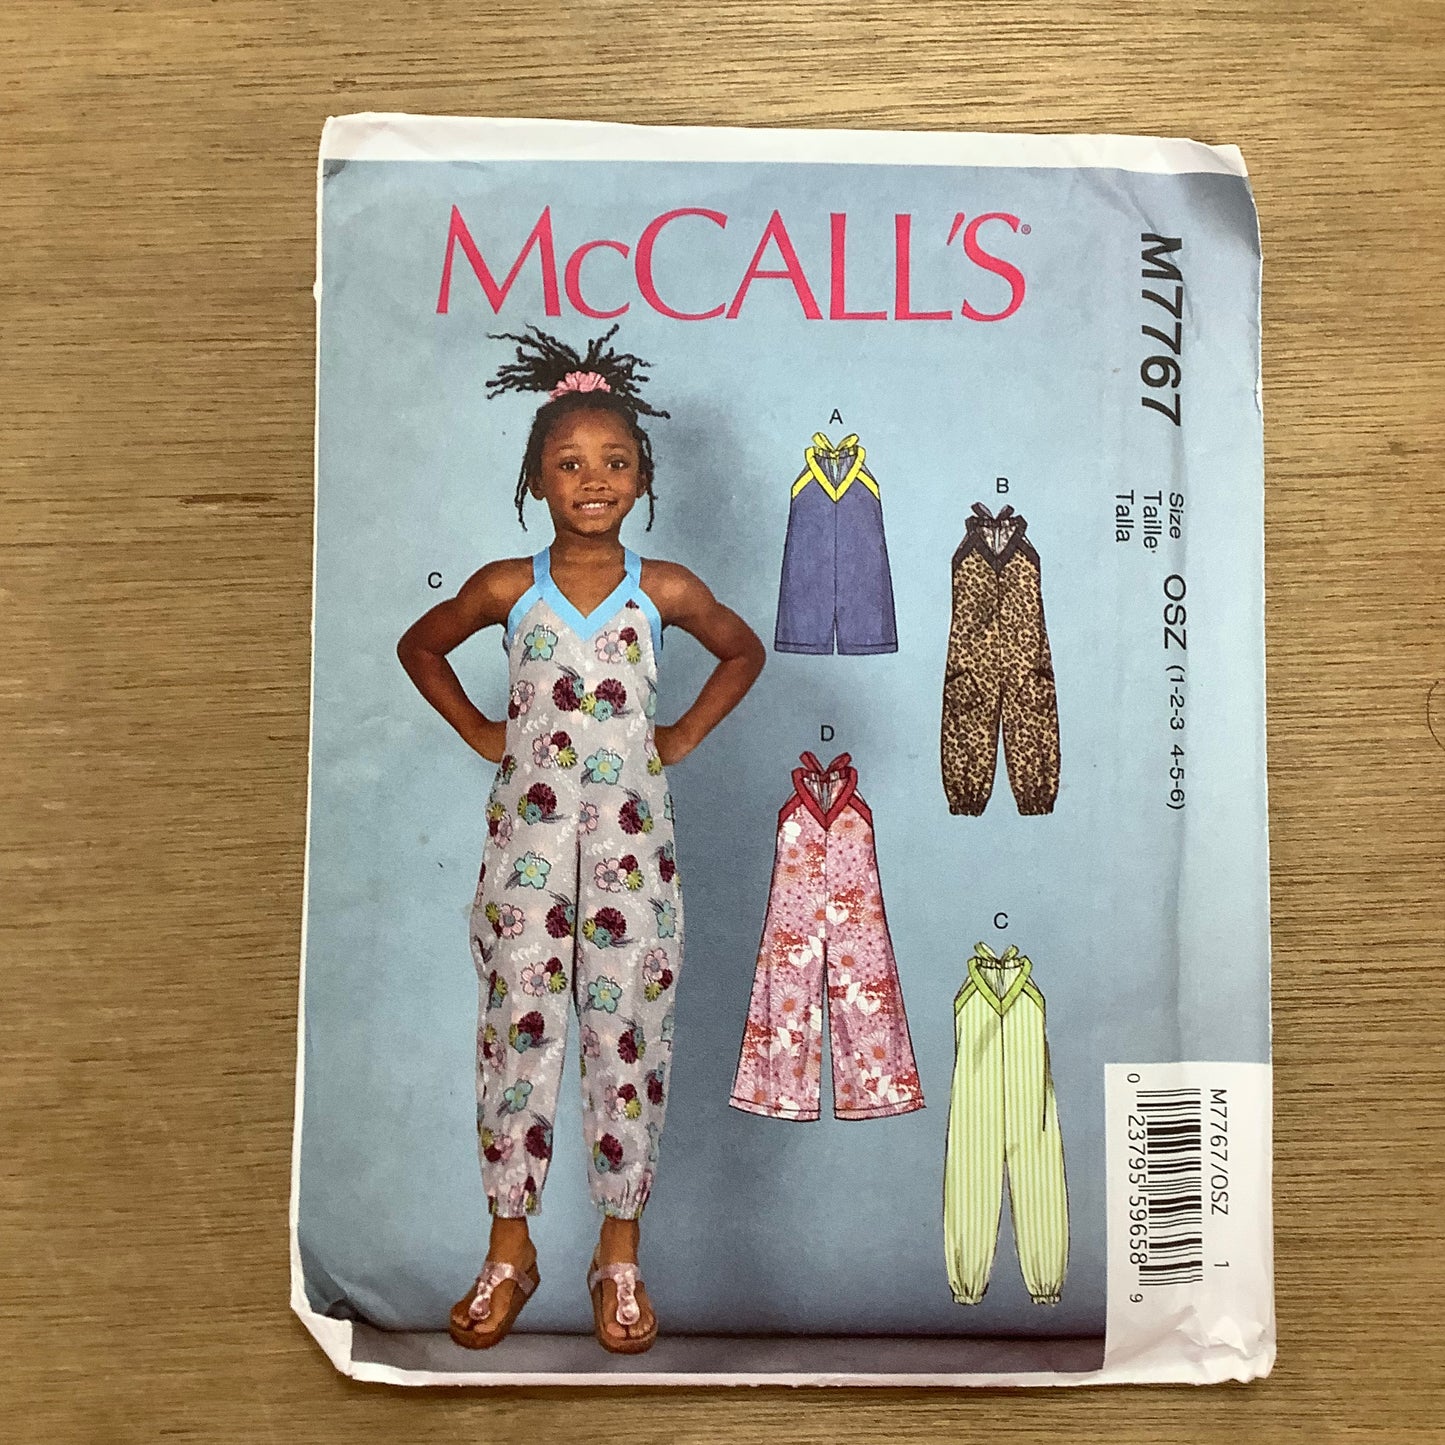 McCall's Dressmaking Sewing Pattern Children's Girl's Jumpsuit Playsuit Romper 7767